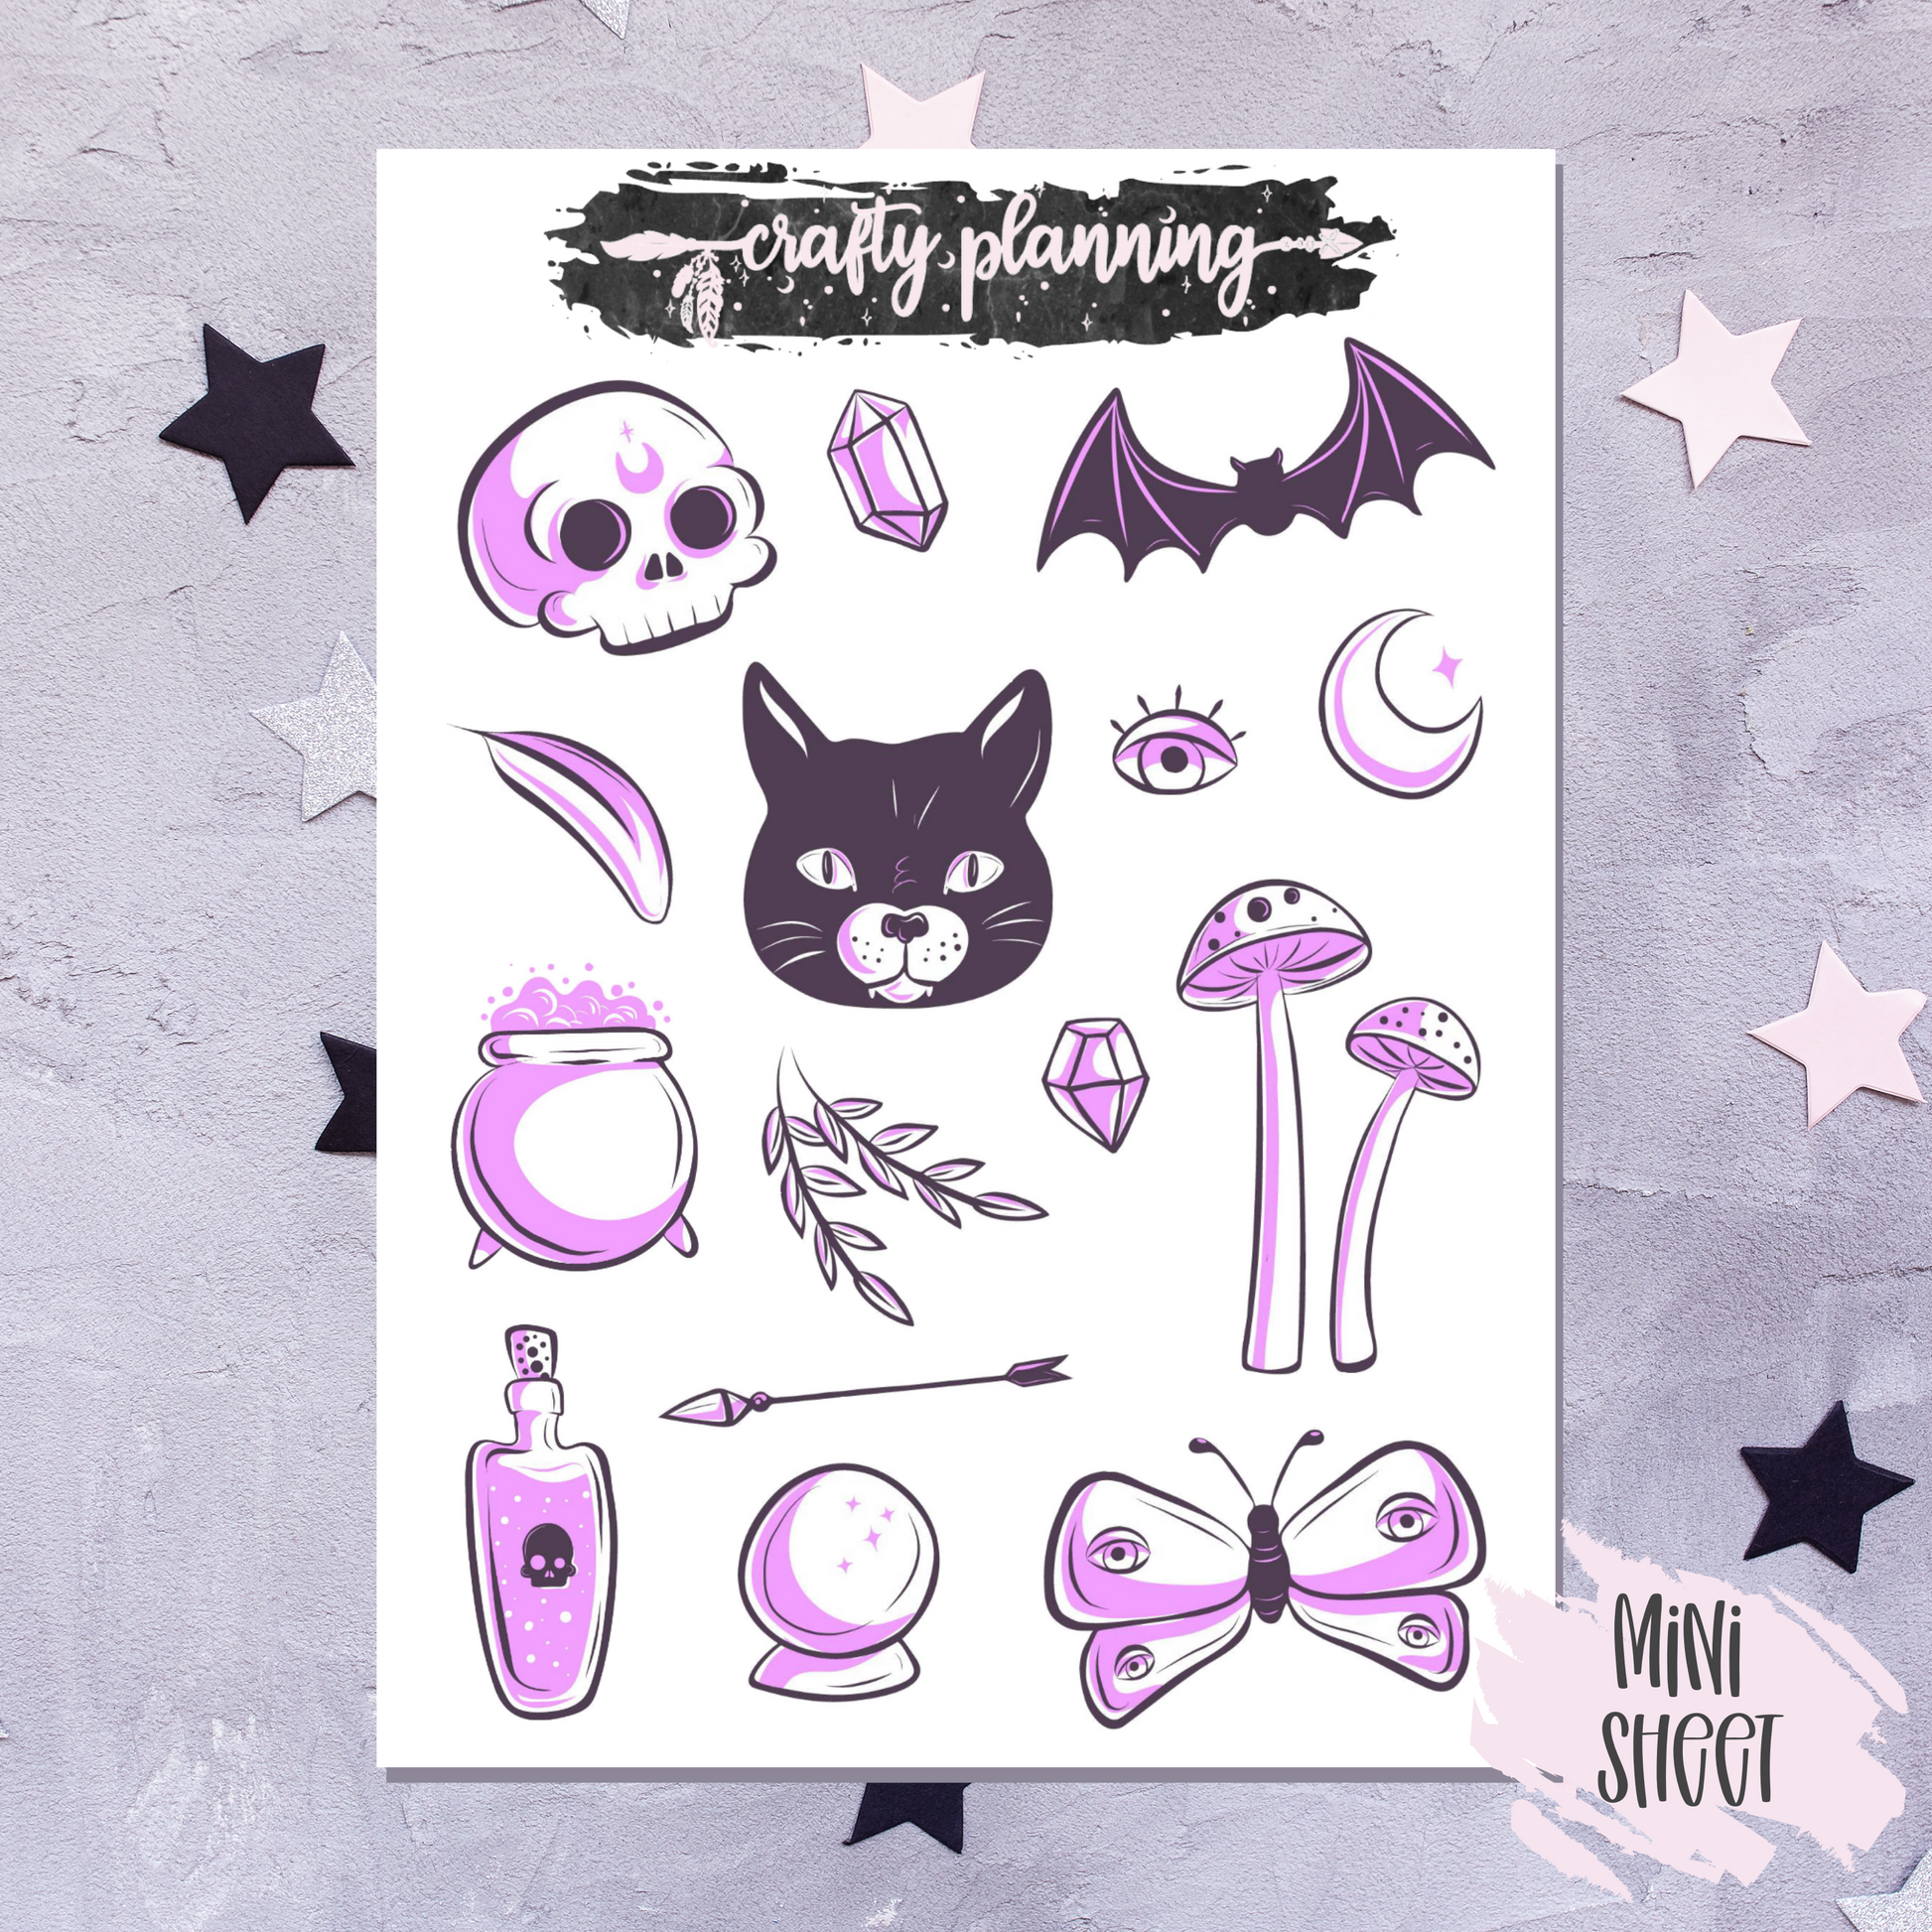 Gothic Stickers, Goth Stickers, Witchy Stickers, Ouija Stickers, Esoteric  Stickers, Deco Stickers, Journal Stickers, Scrapbook Stickers 